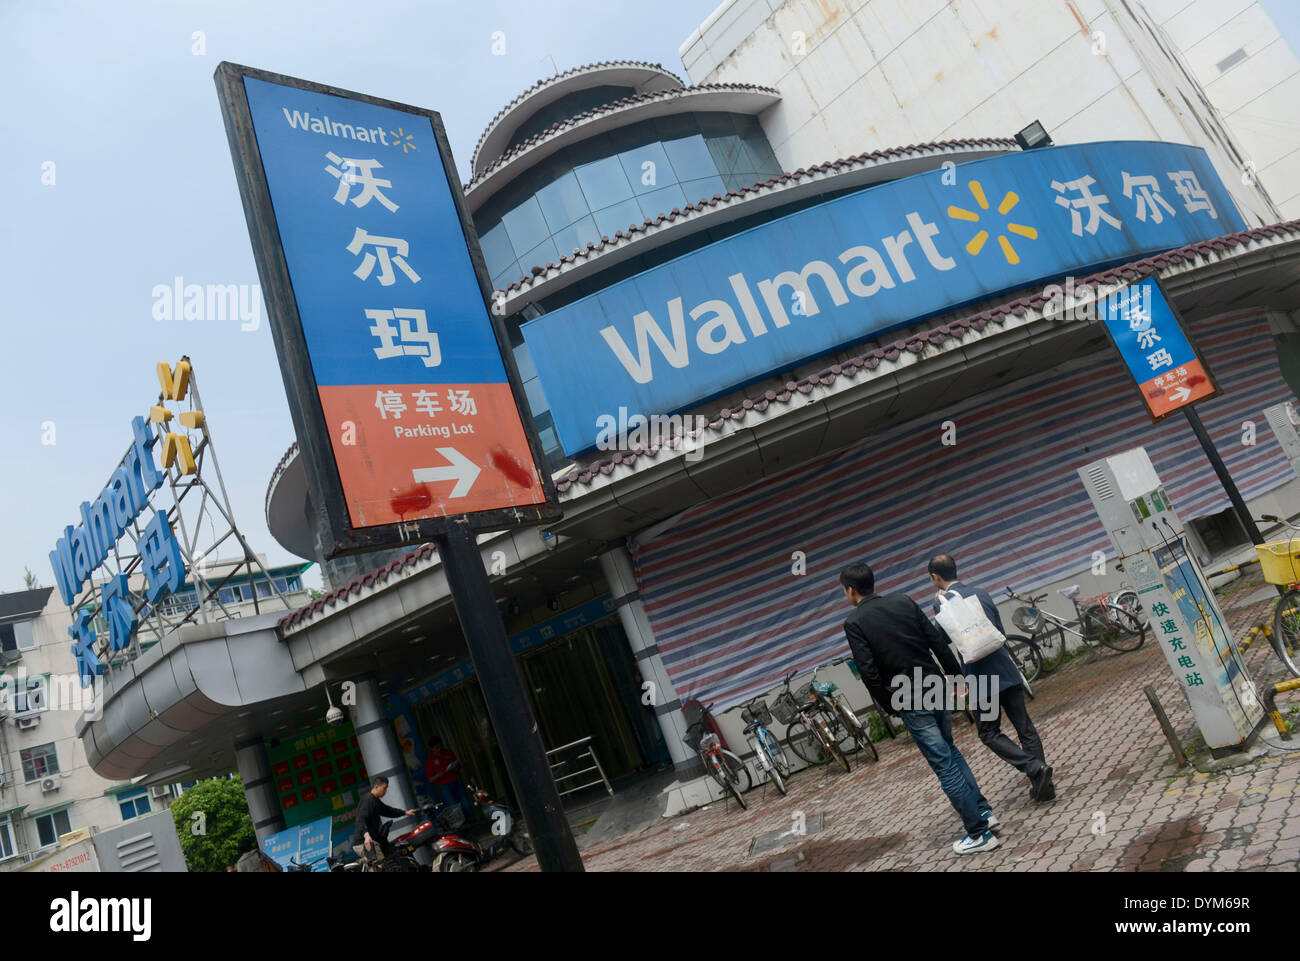 Hangzhou. 22nd Apr, 2014. Photo taken on April 22, 2014 shows the Zhaohui outlet of Walmart Stores which is to be closed in Hangzhou, capital of east China's Zhejiang Province. Walmart Stores, the world's largest retailer, decided to close the Zhaohui outlet in Hangzhou on April 23 due to its poor performance. © Han Chuanhao/Xinhua/Alamy Live News Stock Photo